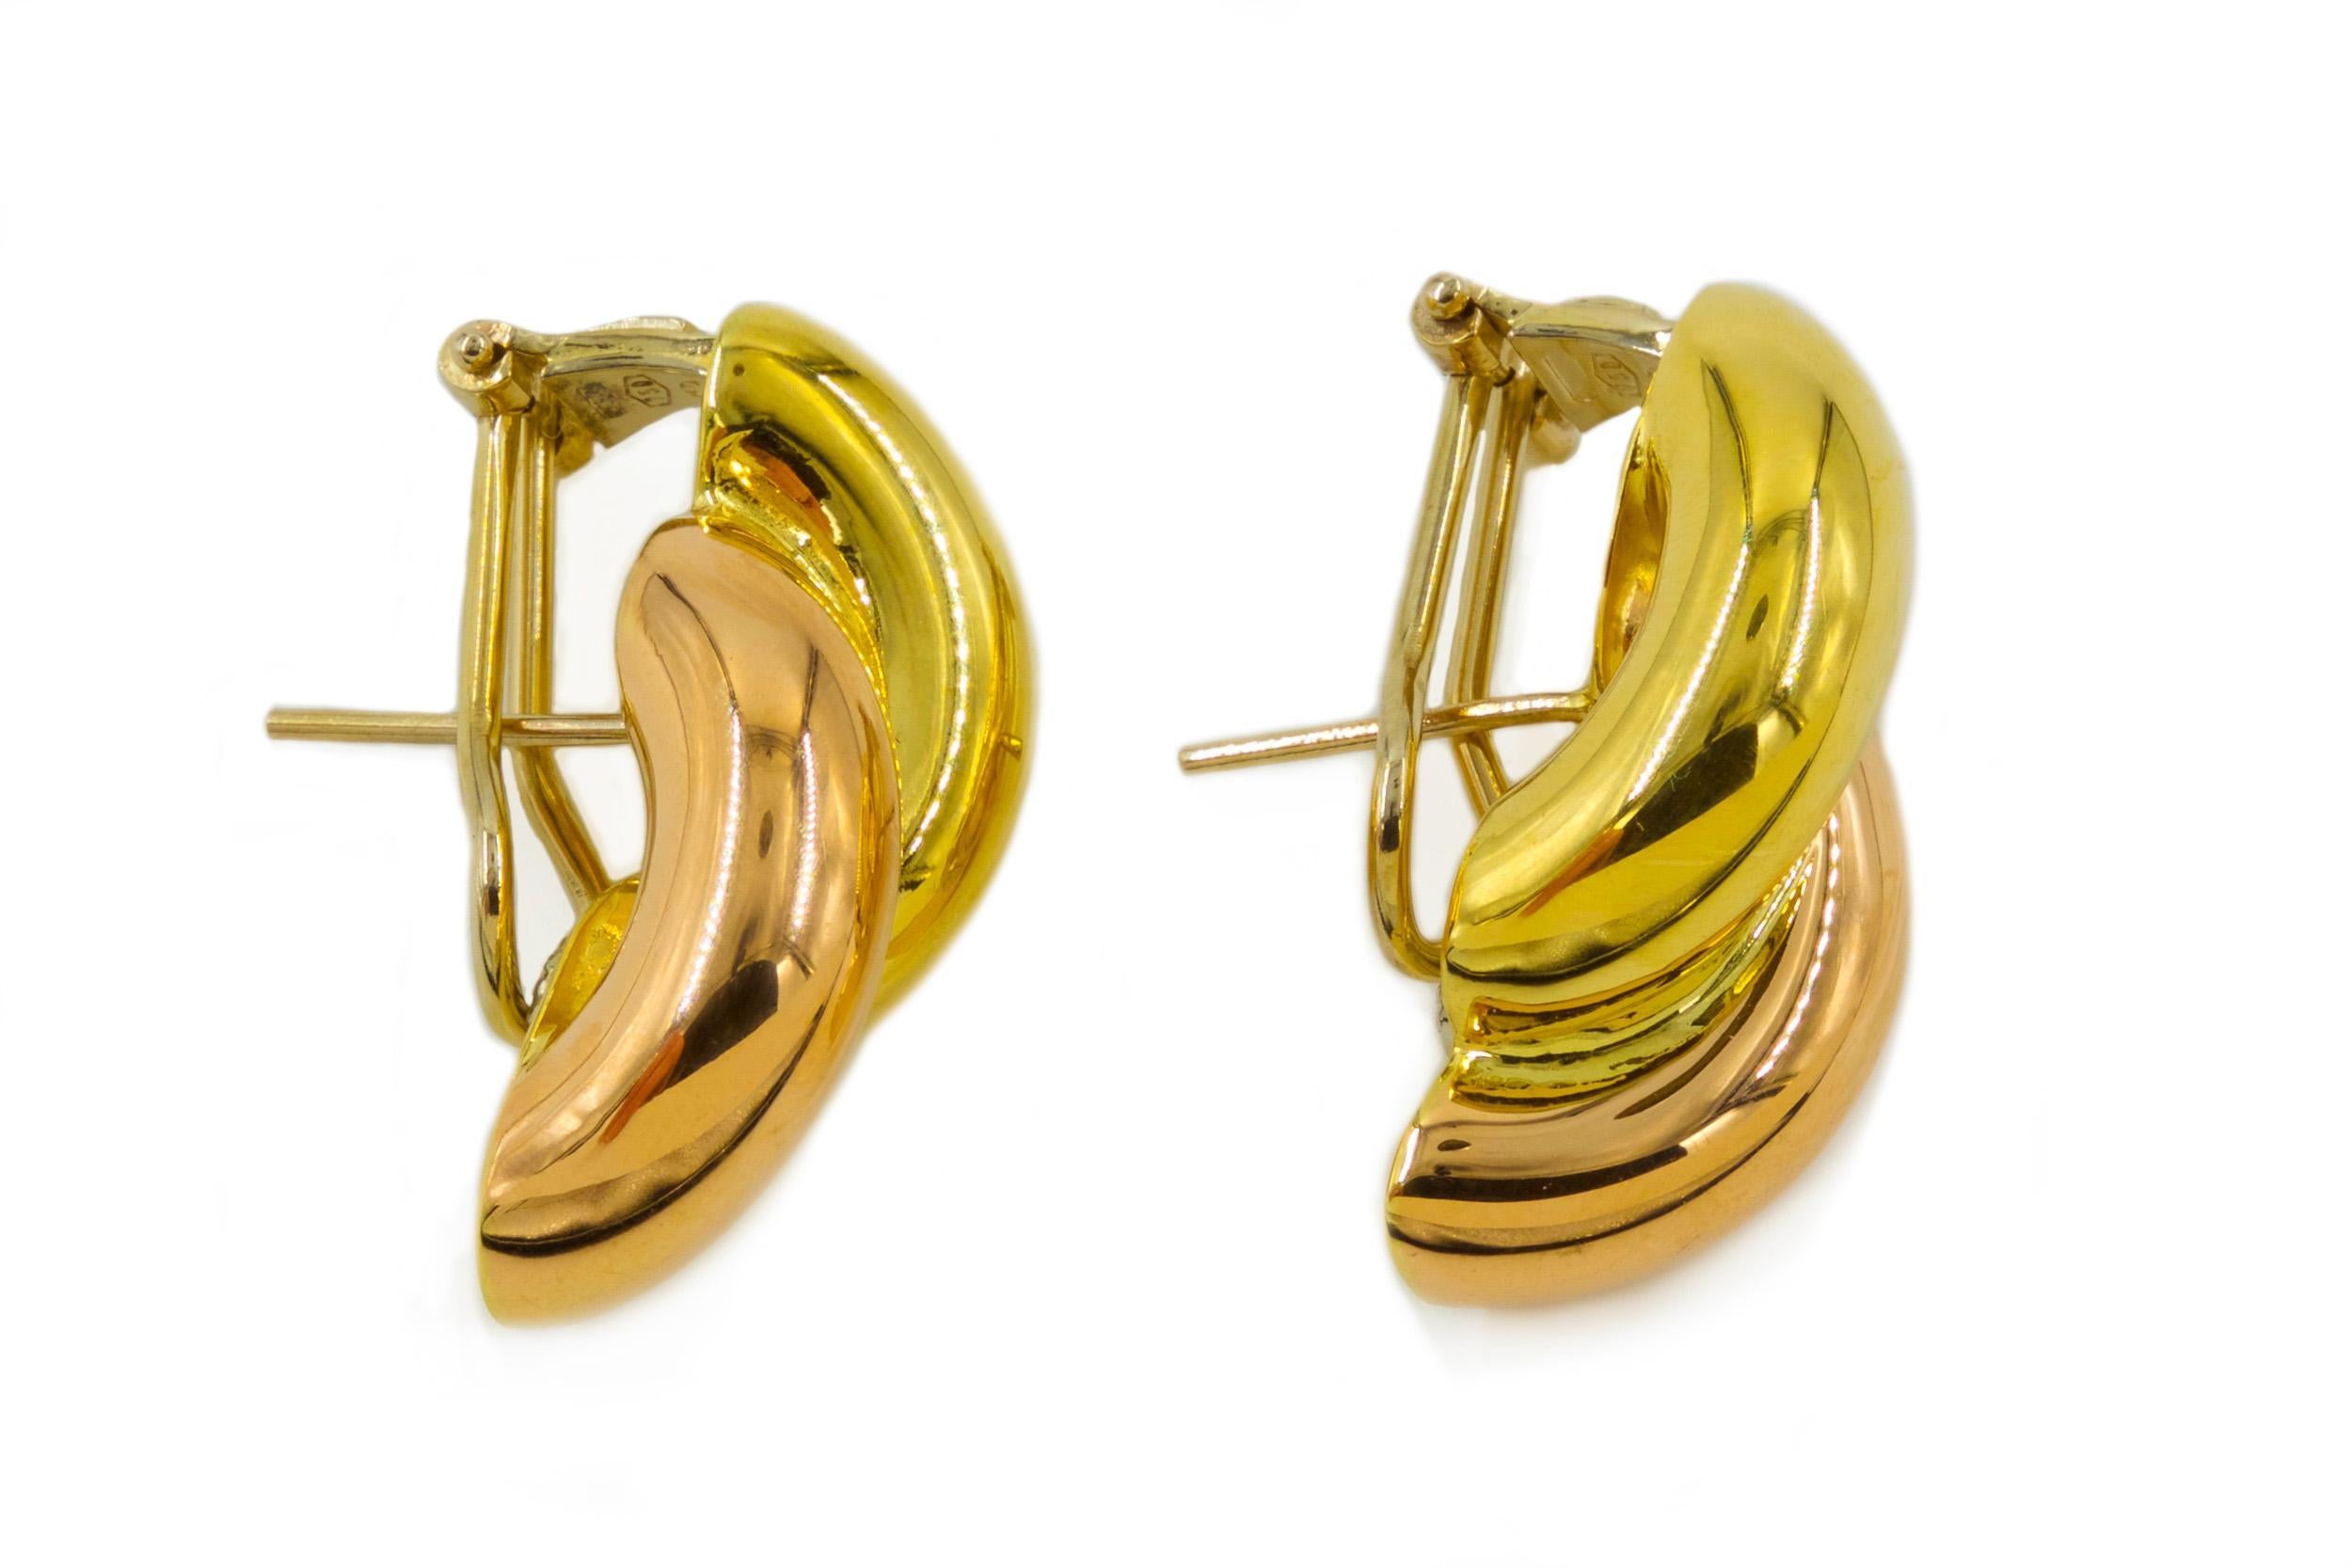 Contemporary Pair of Pink and Yellow 18k Gold Half-Tube Earrings by Nicolis Cola For Sale